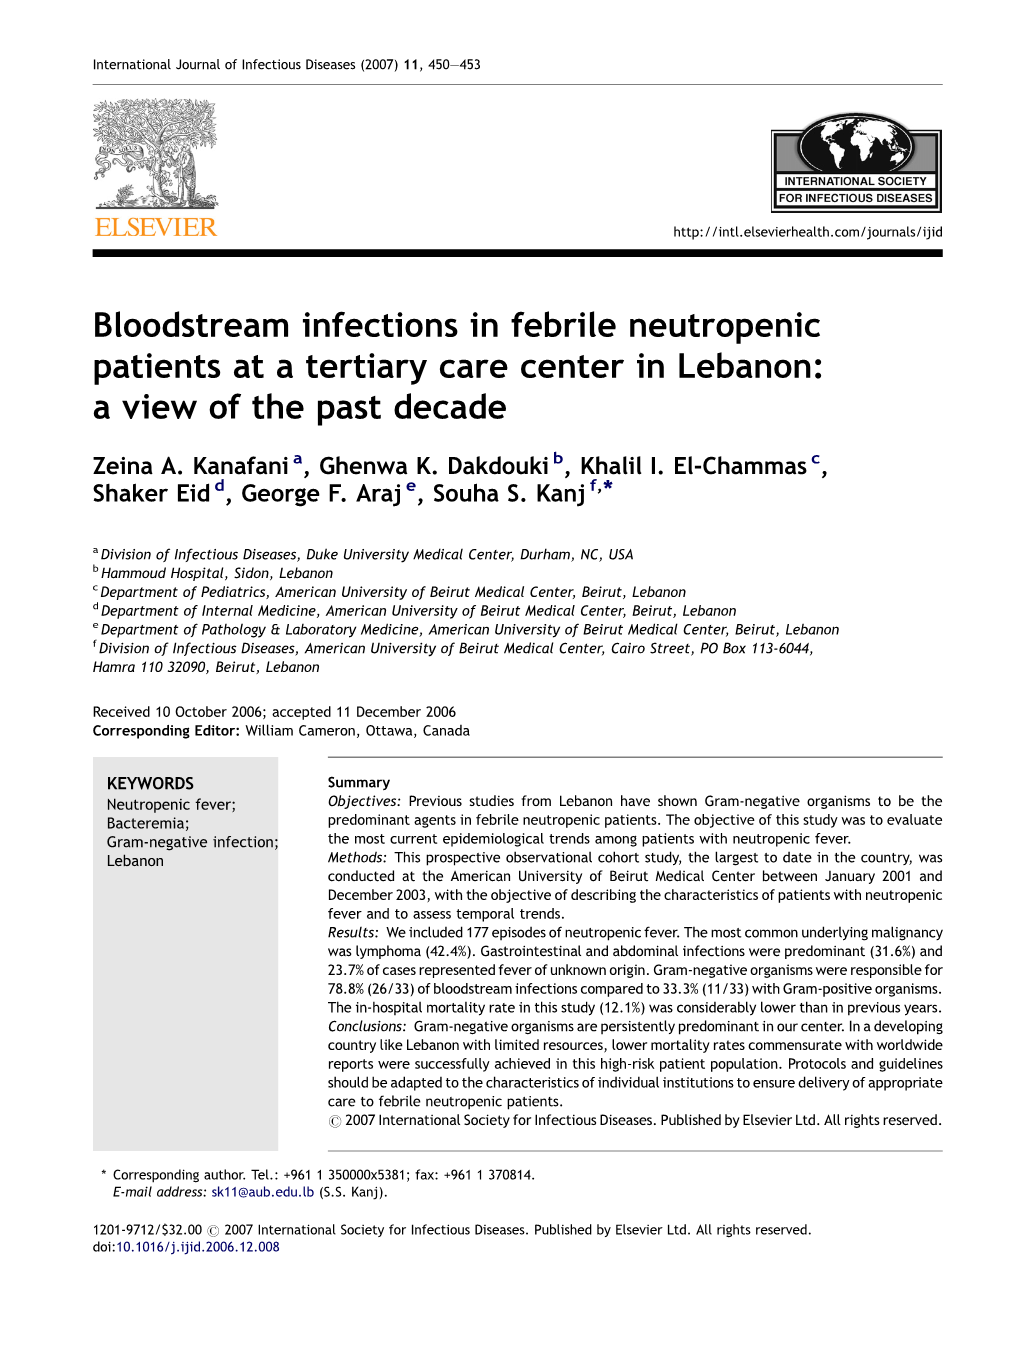 Bloodstream Infections in Febrile Neutropenic Patients at a Tertiary Care Center in Lebanon: a View of the Past Decade